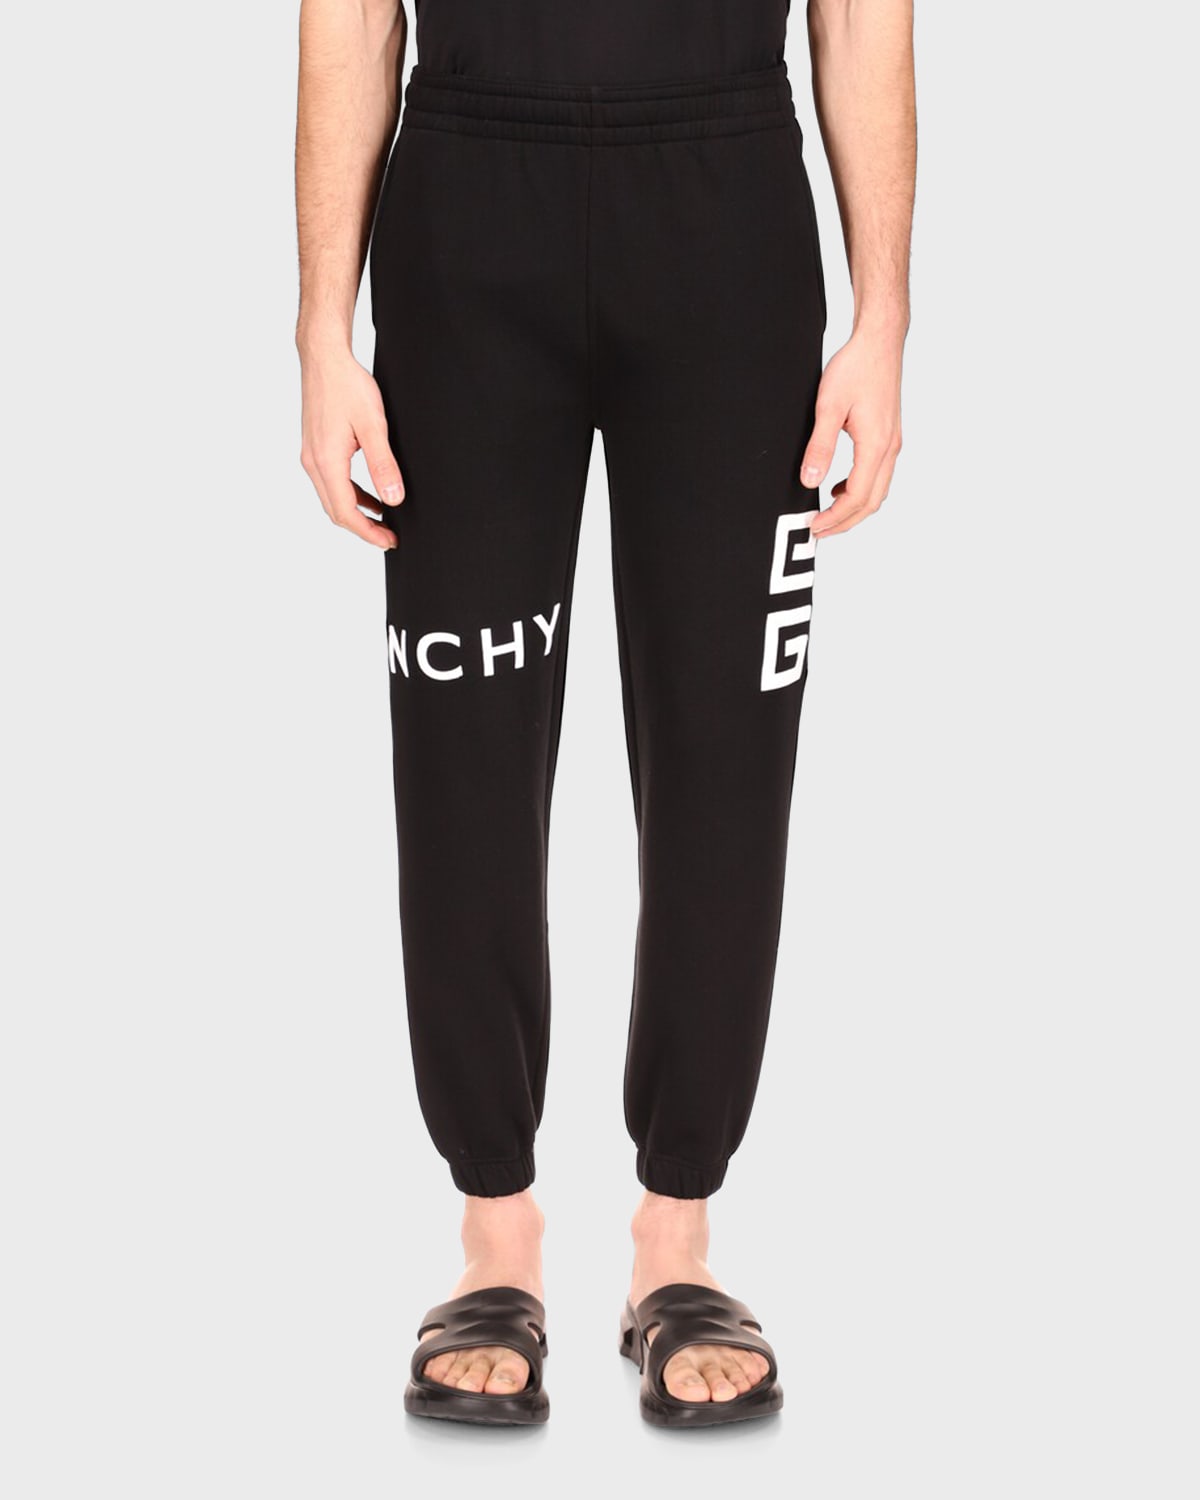 Givenchy Pants | Neiman Marcus